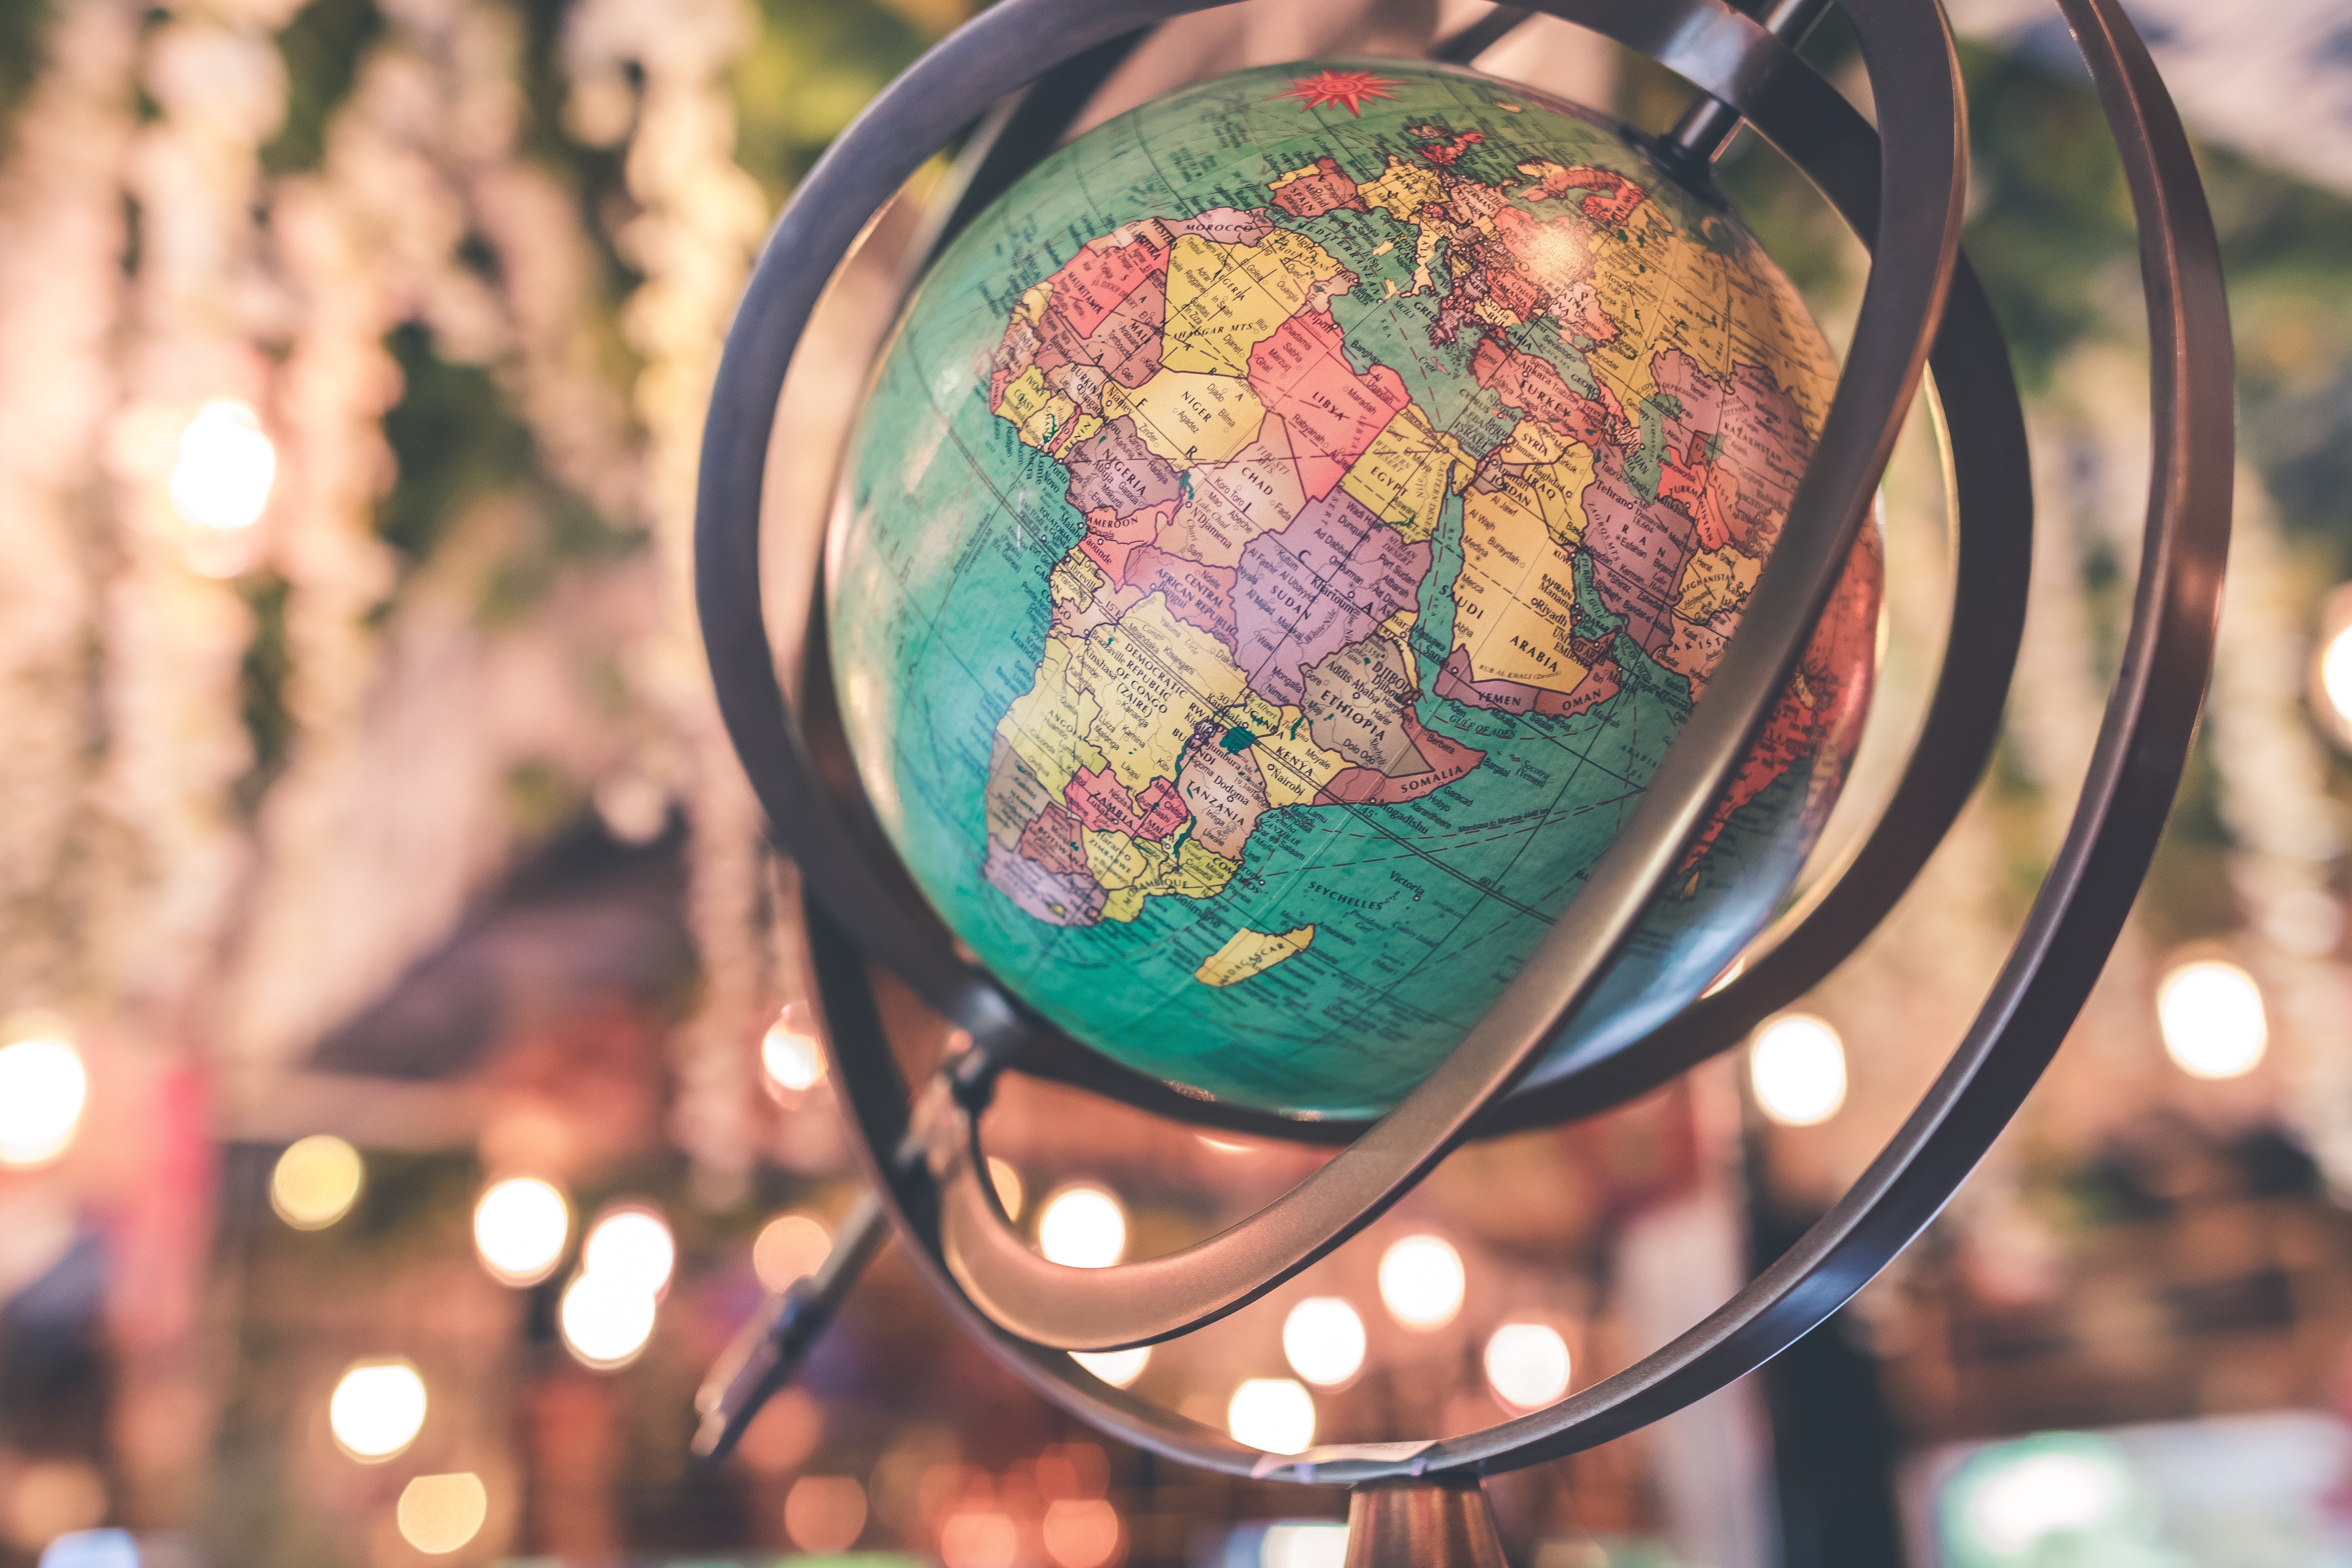 Print out "You Mean The World To Me" on gold foil paper and cover a globe similar  to this one in it. | Photo: Pexels. 